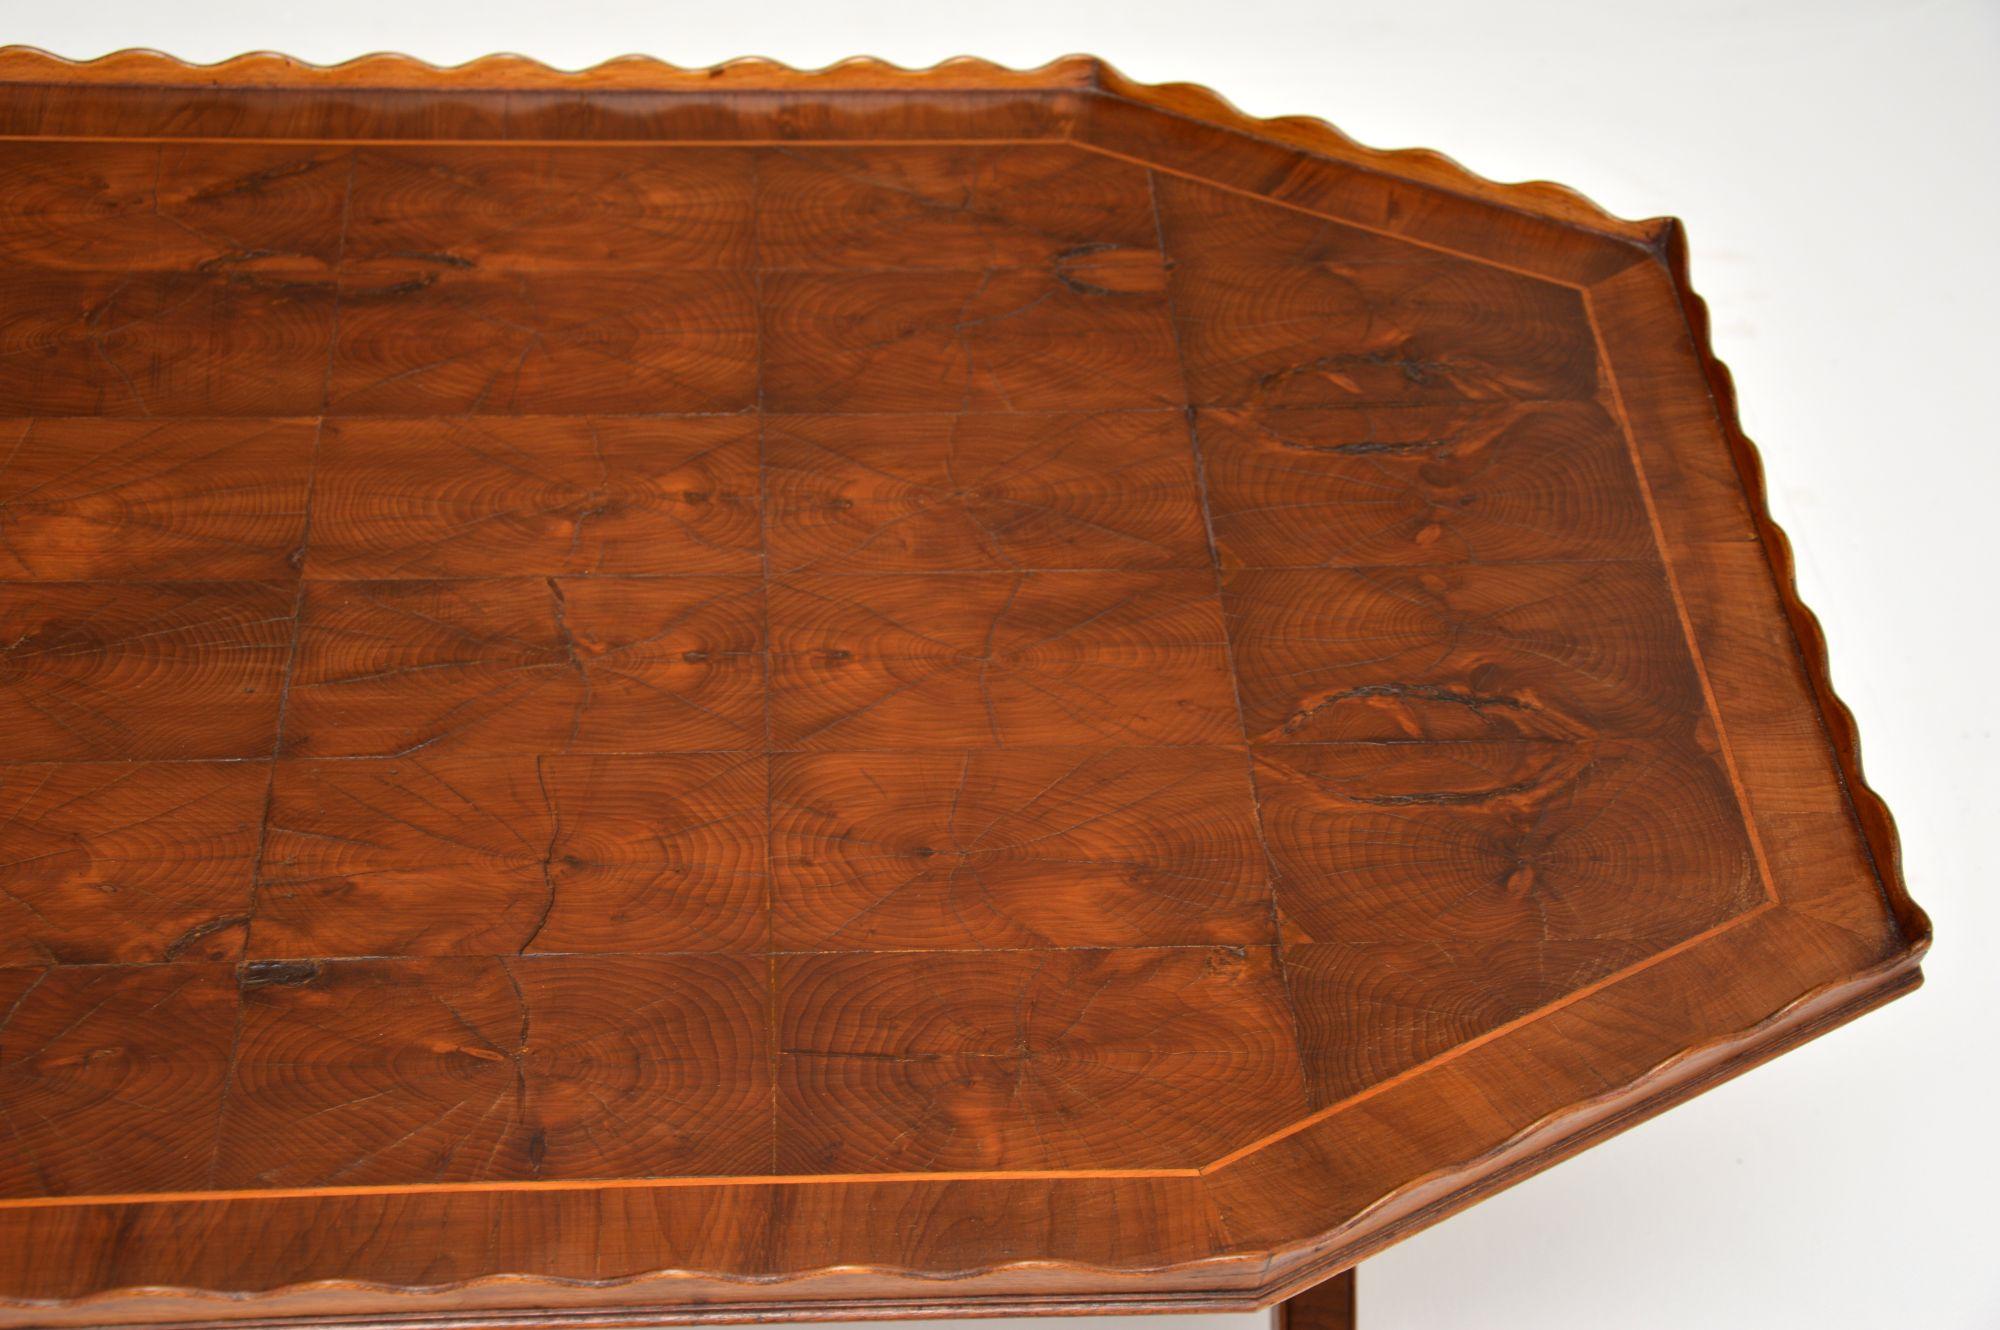 English Antique Yew Wood Oyster Veneer Coffee Table